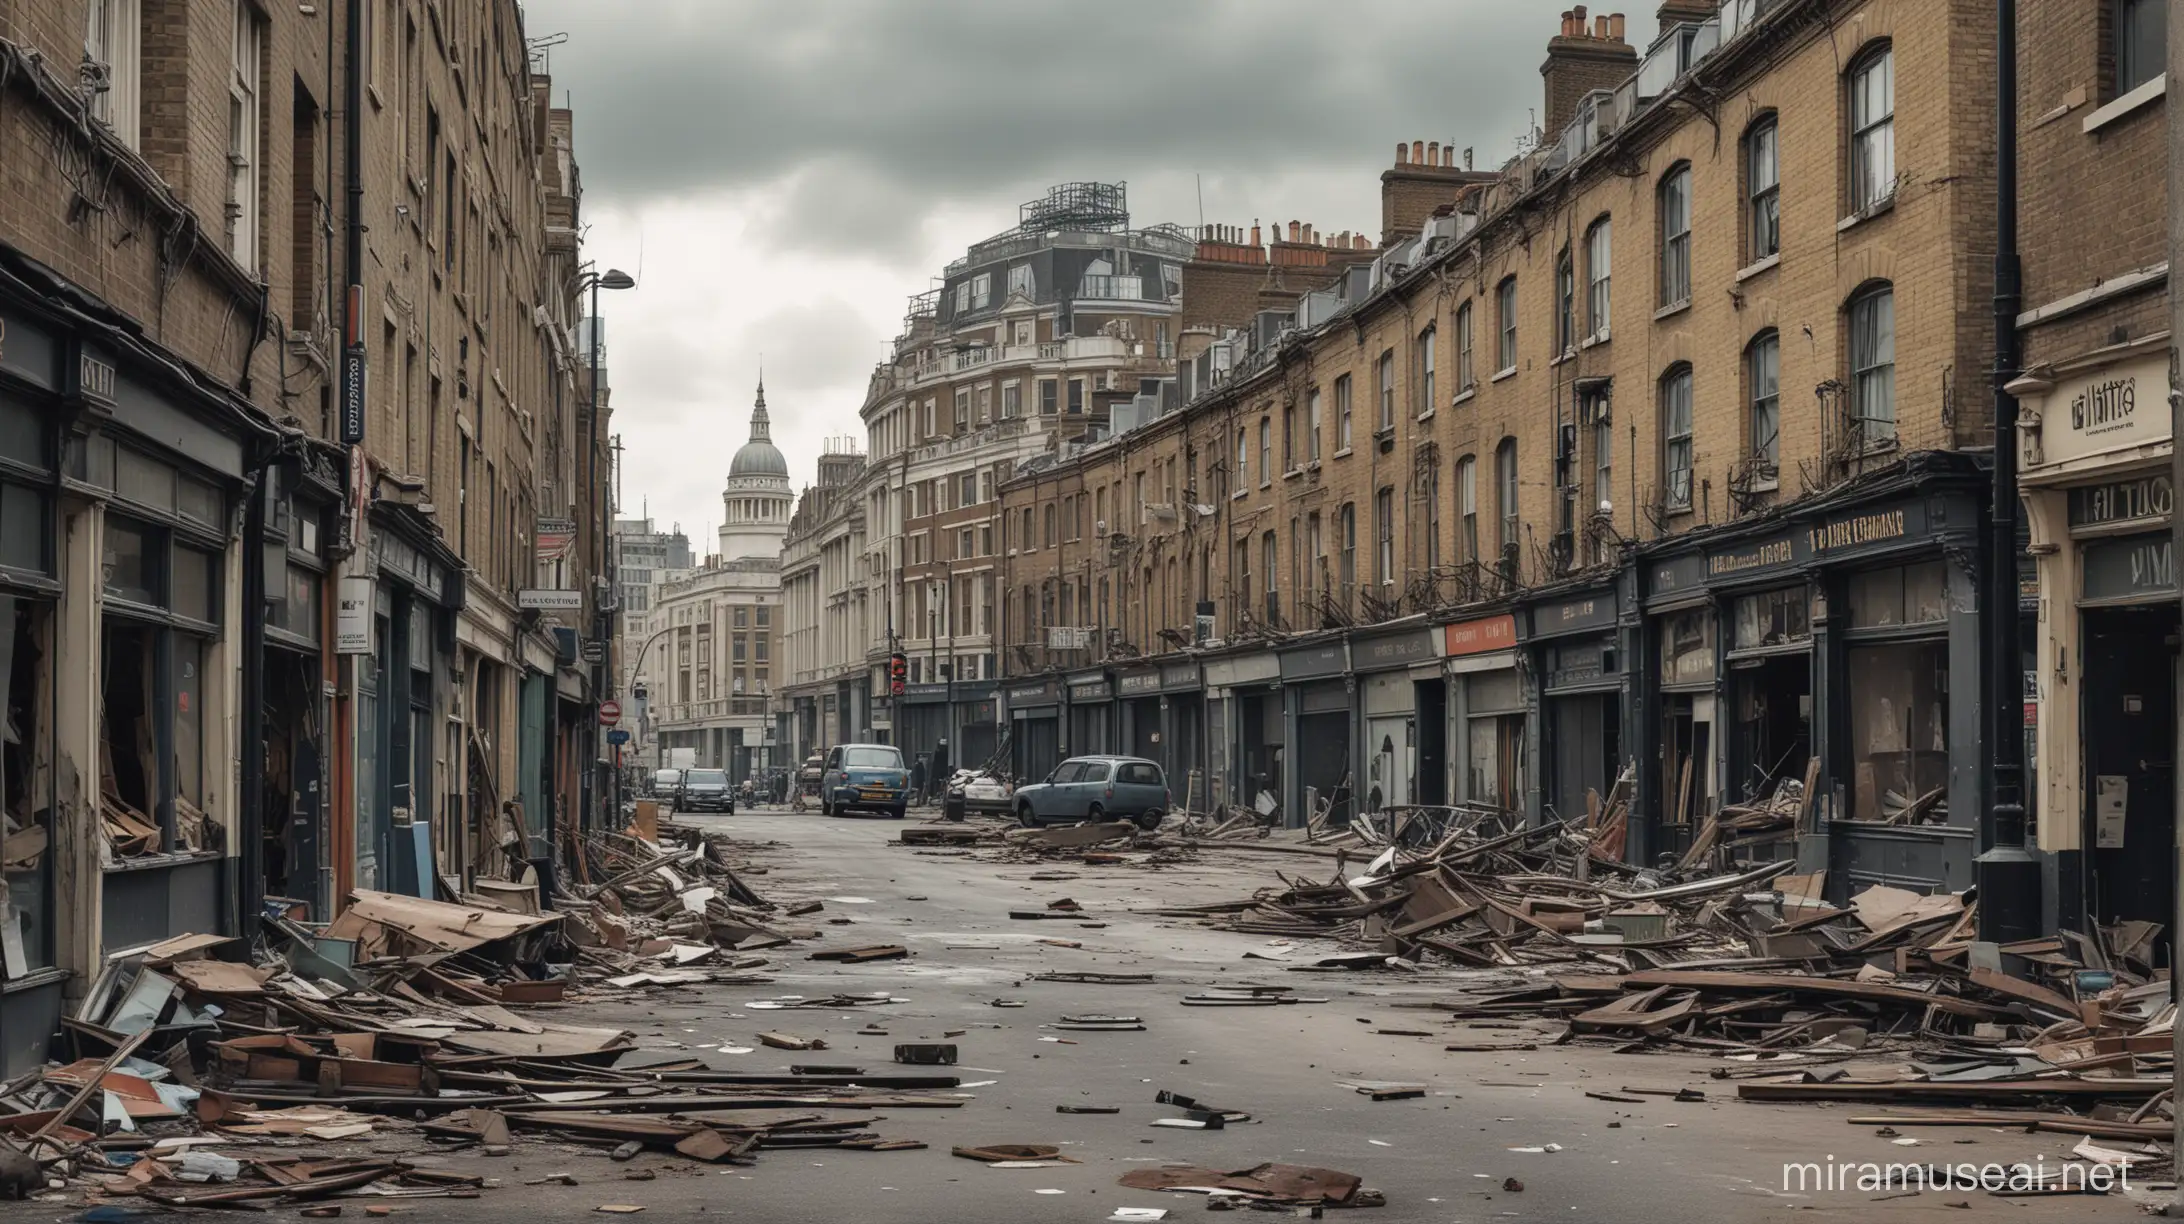 A book cover image. A wide view of a damaged, post apocolypse
 London from the street.
